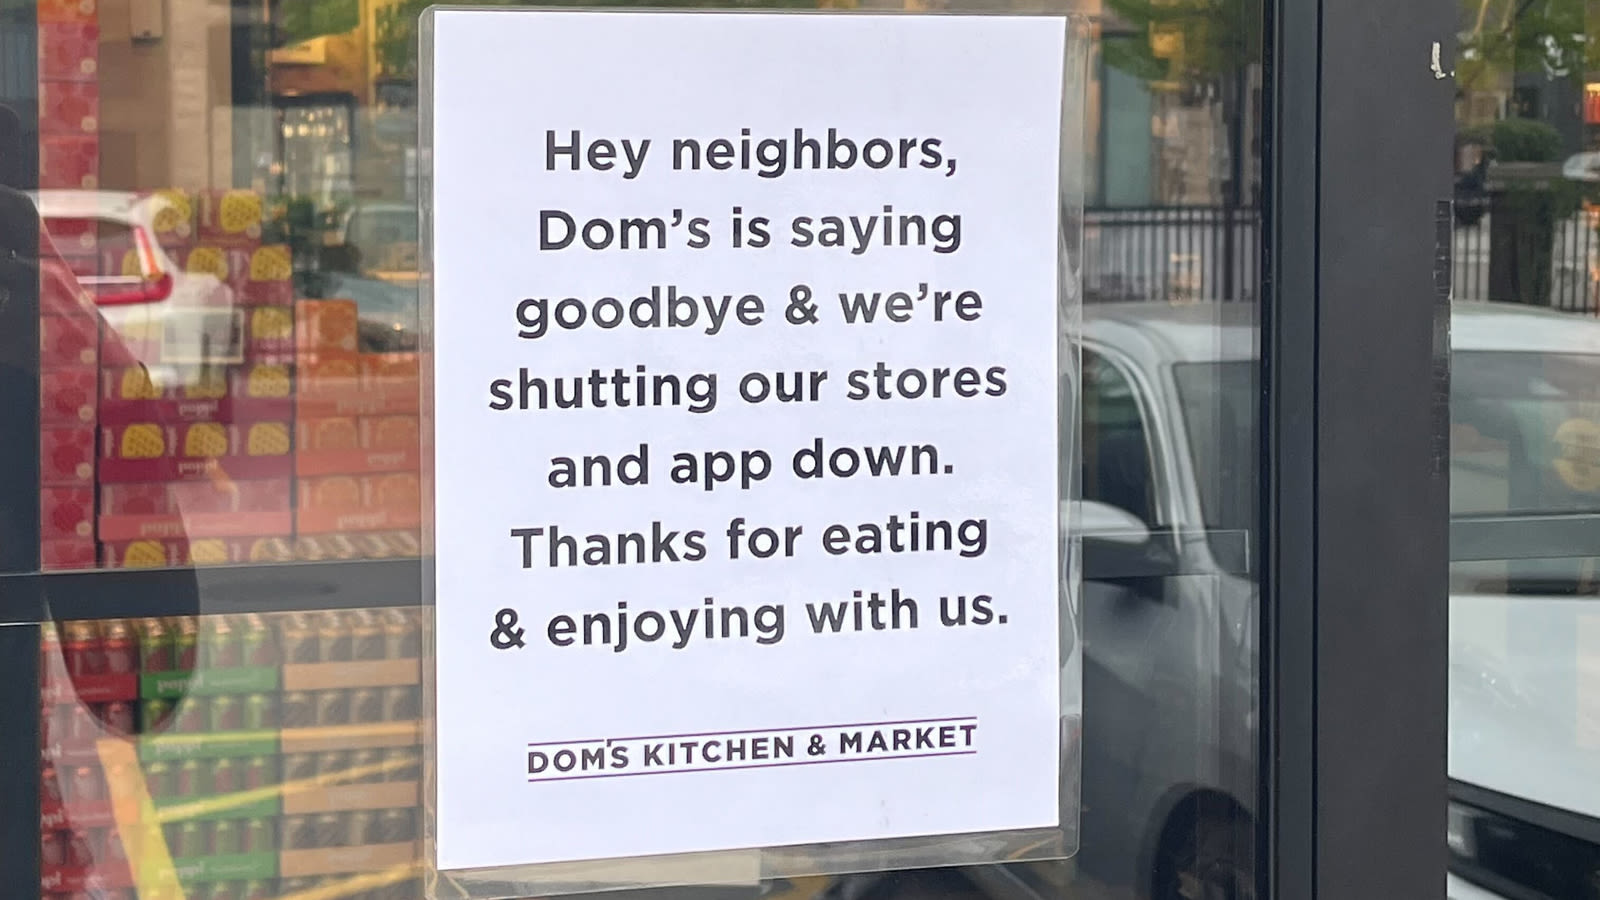 Chicago-based grocers Foxtrot, Dom's close over 30 locations, months after announcing merger